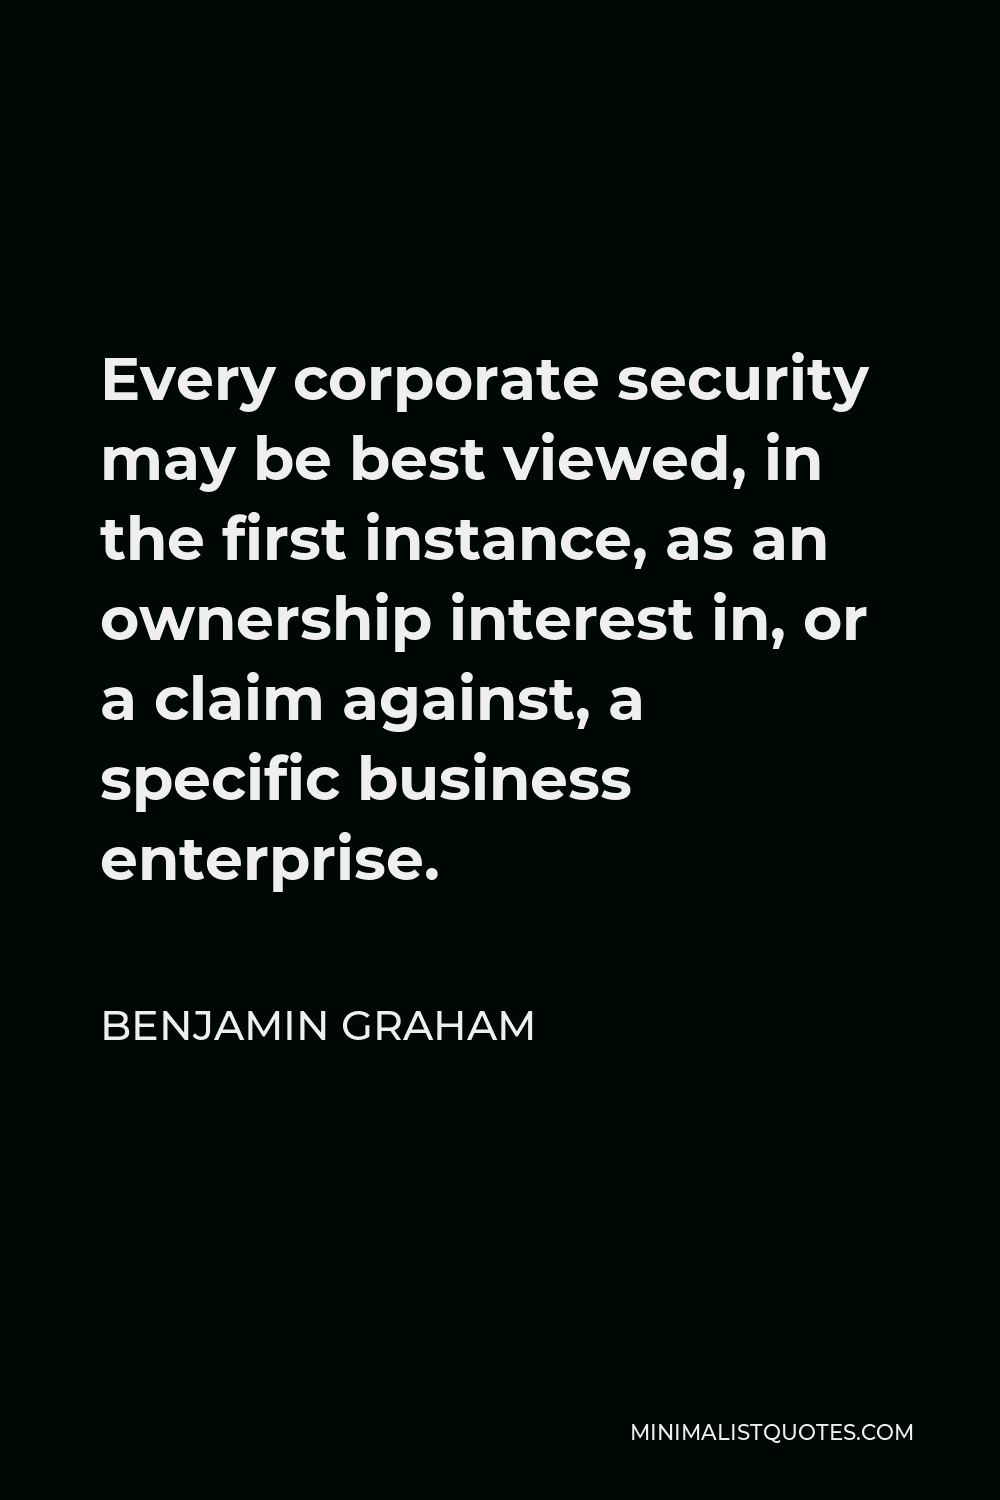 Benjamin Graham Quote - Every corporate security may be best viewed, in the first instance, as an ownership interest in, or a claim against, a specific business enterprise.